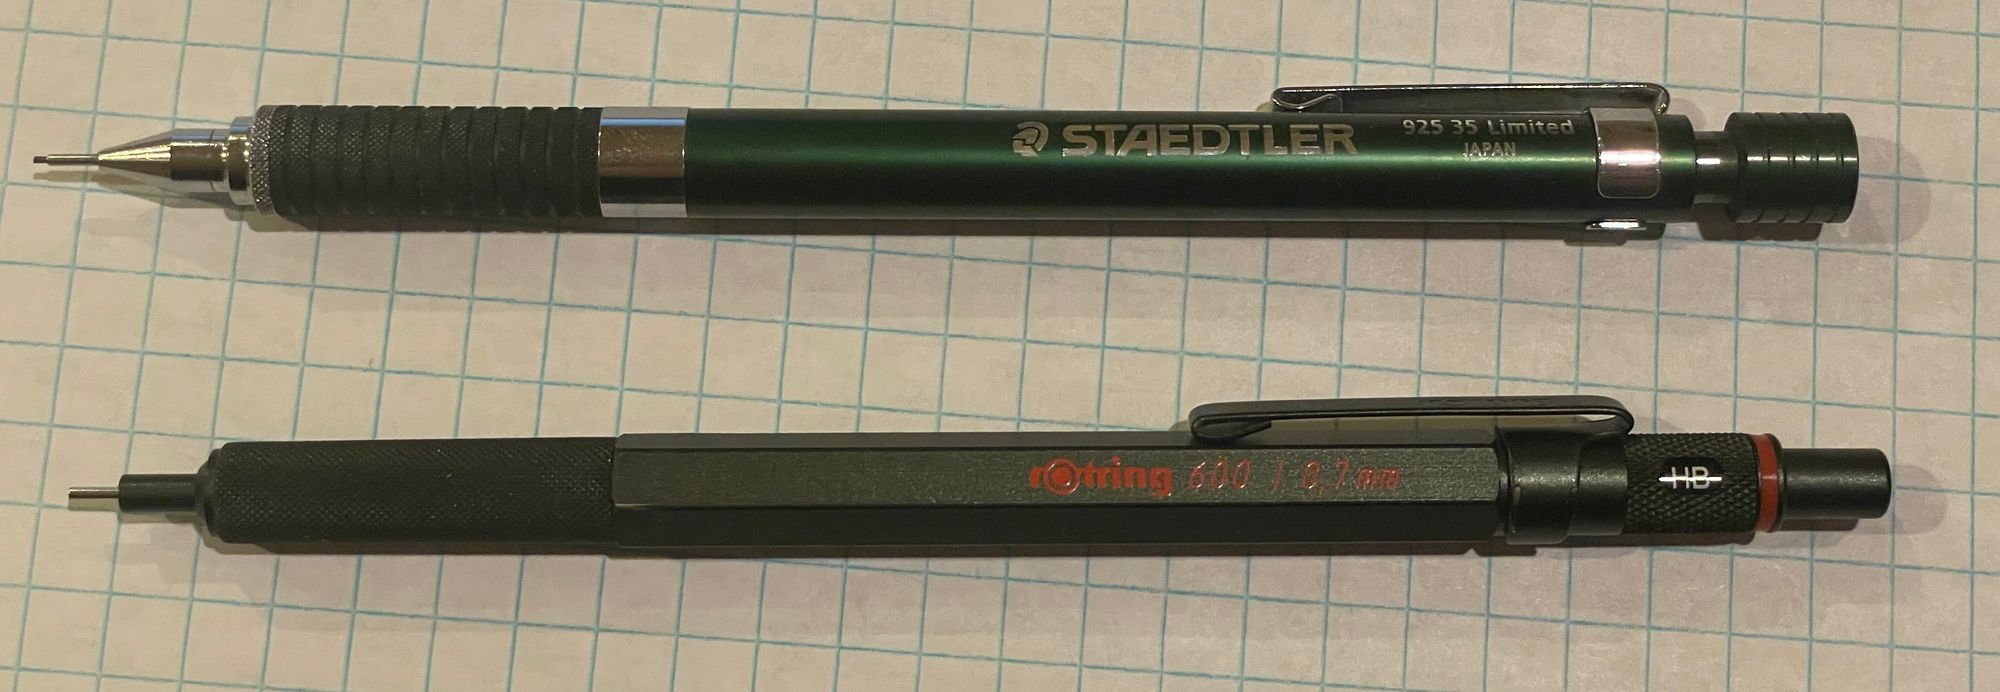 The Most Expensive Vintage Mechanical Pencils